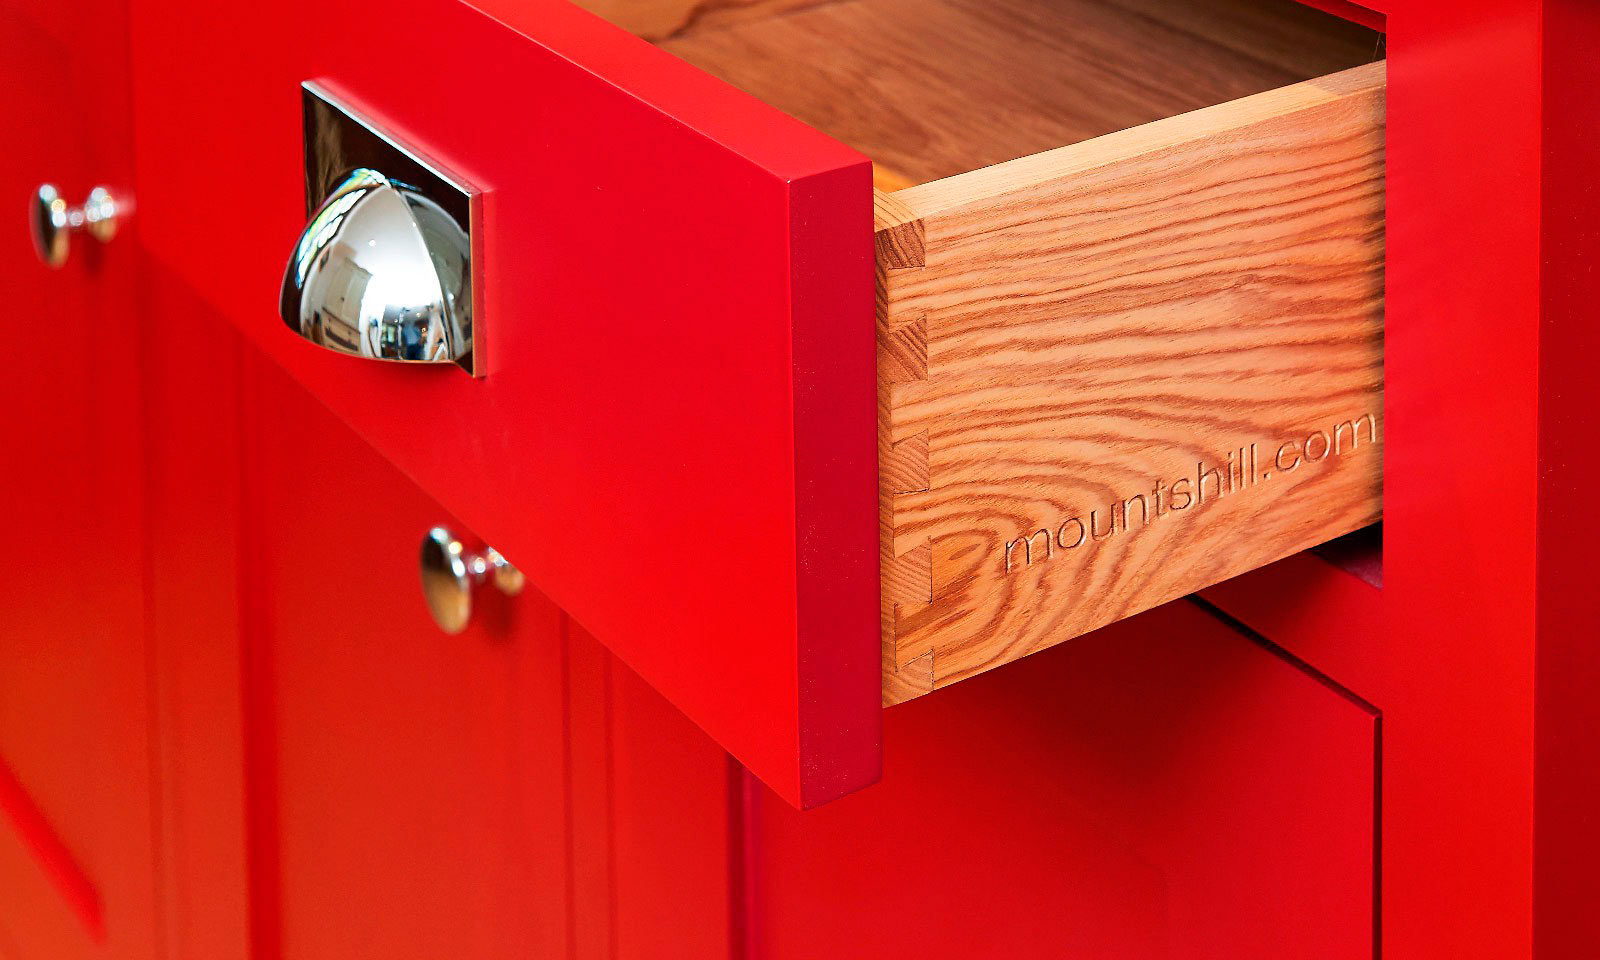 Scarlet Dresser. A bespoke, handmade, hand-painted traditional red dresser, for inclusion in a classic shaker style kitchen. Manufactured with an ash top and bright polished chrome cup handles, another future antique from Mounts Hill Woodcraft.